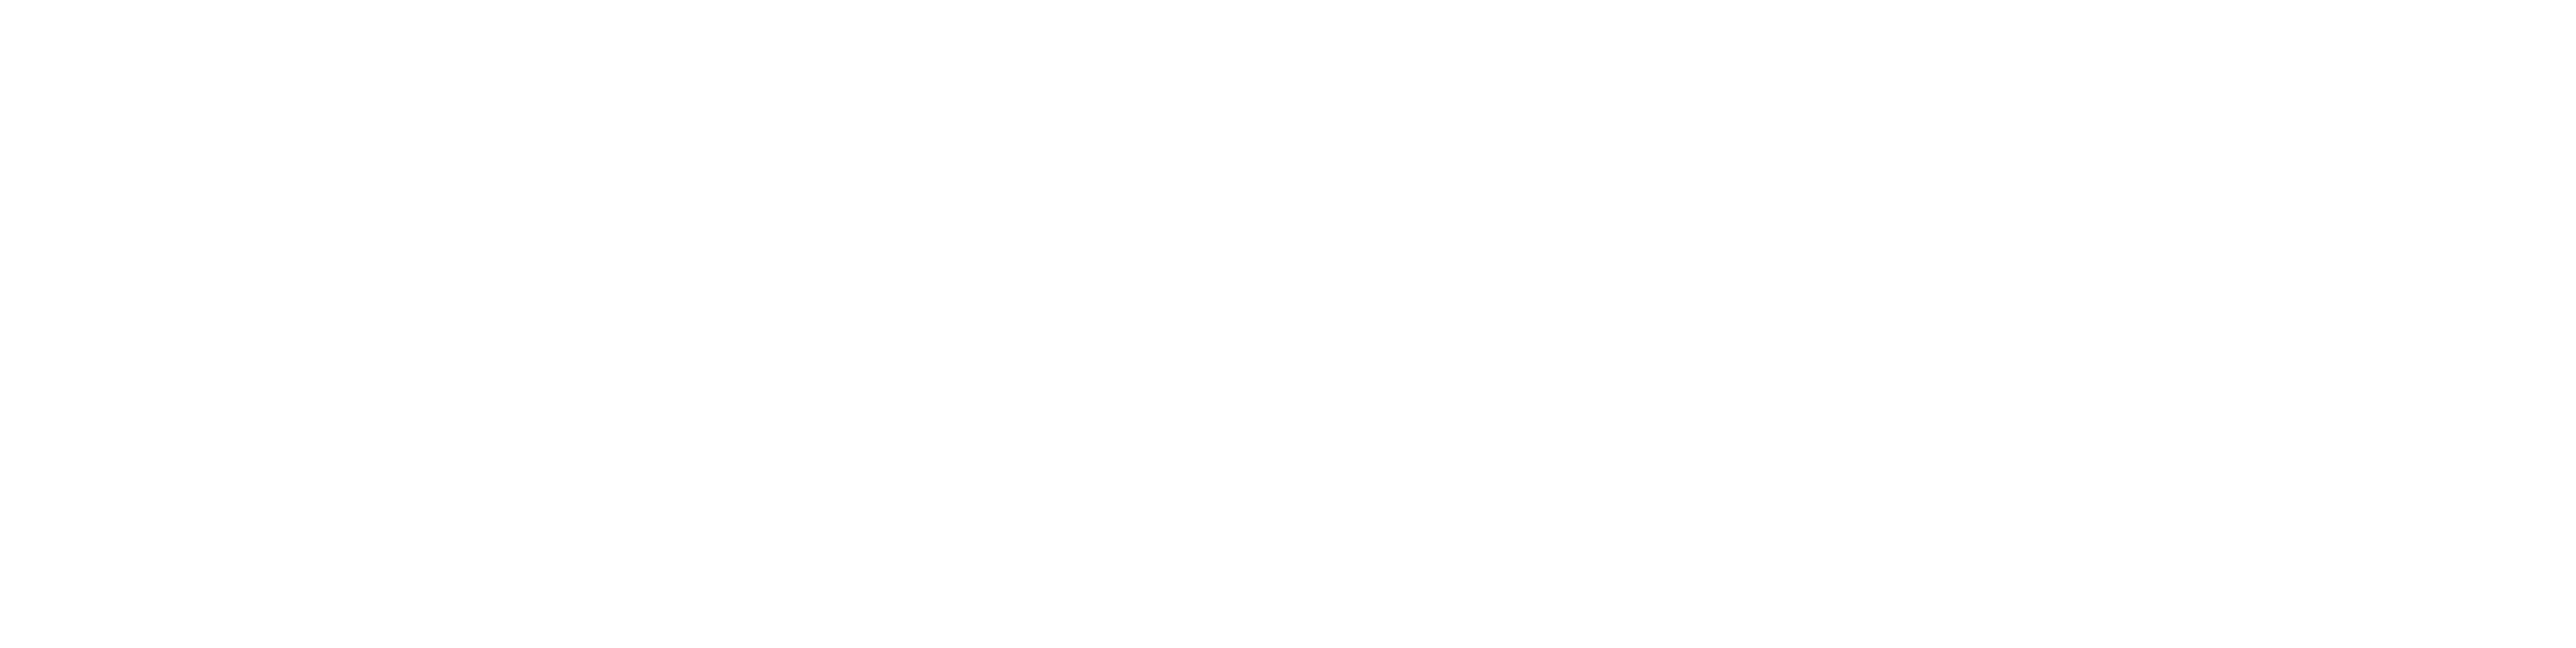 The Institute of Applied Psychology